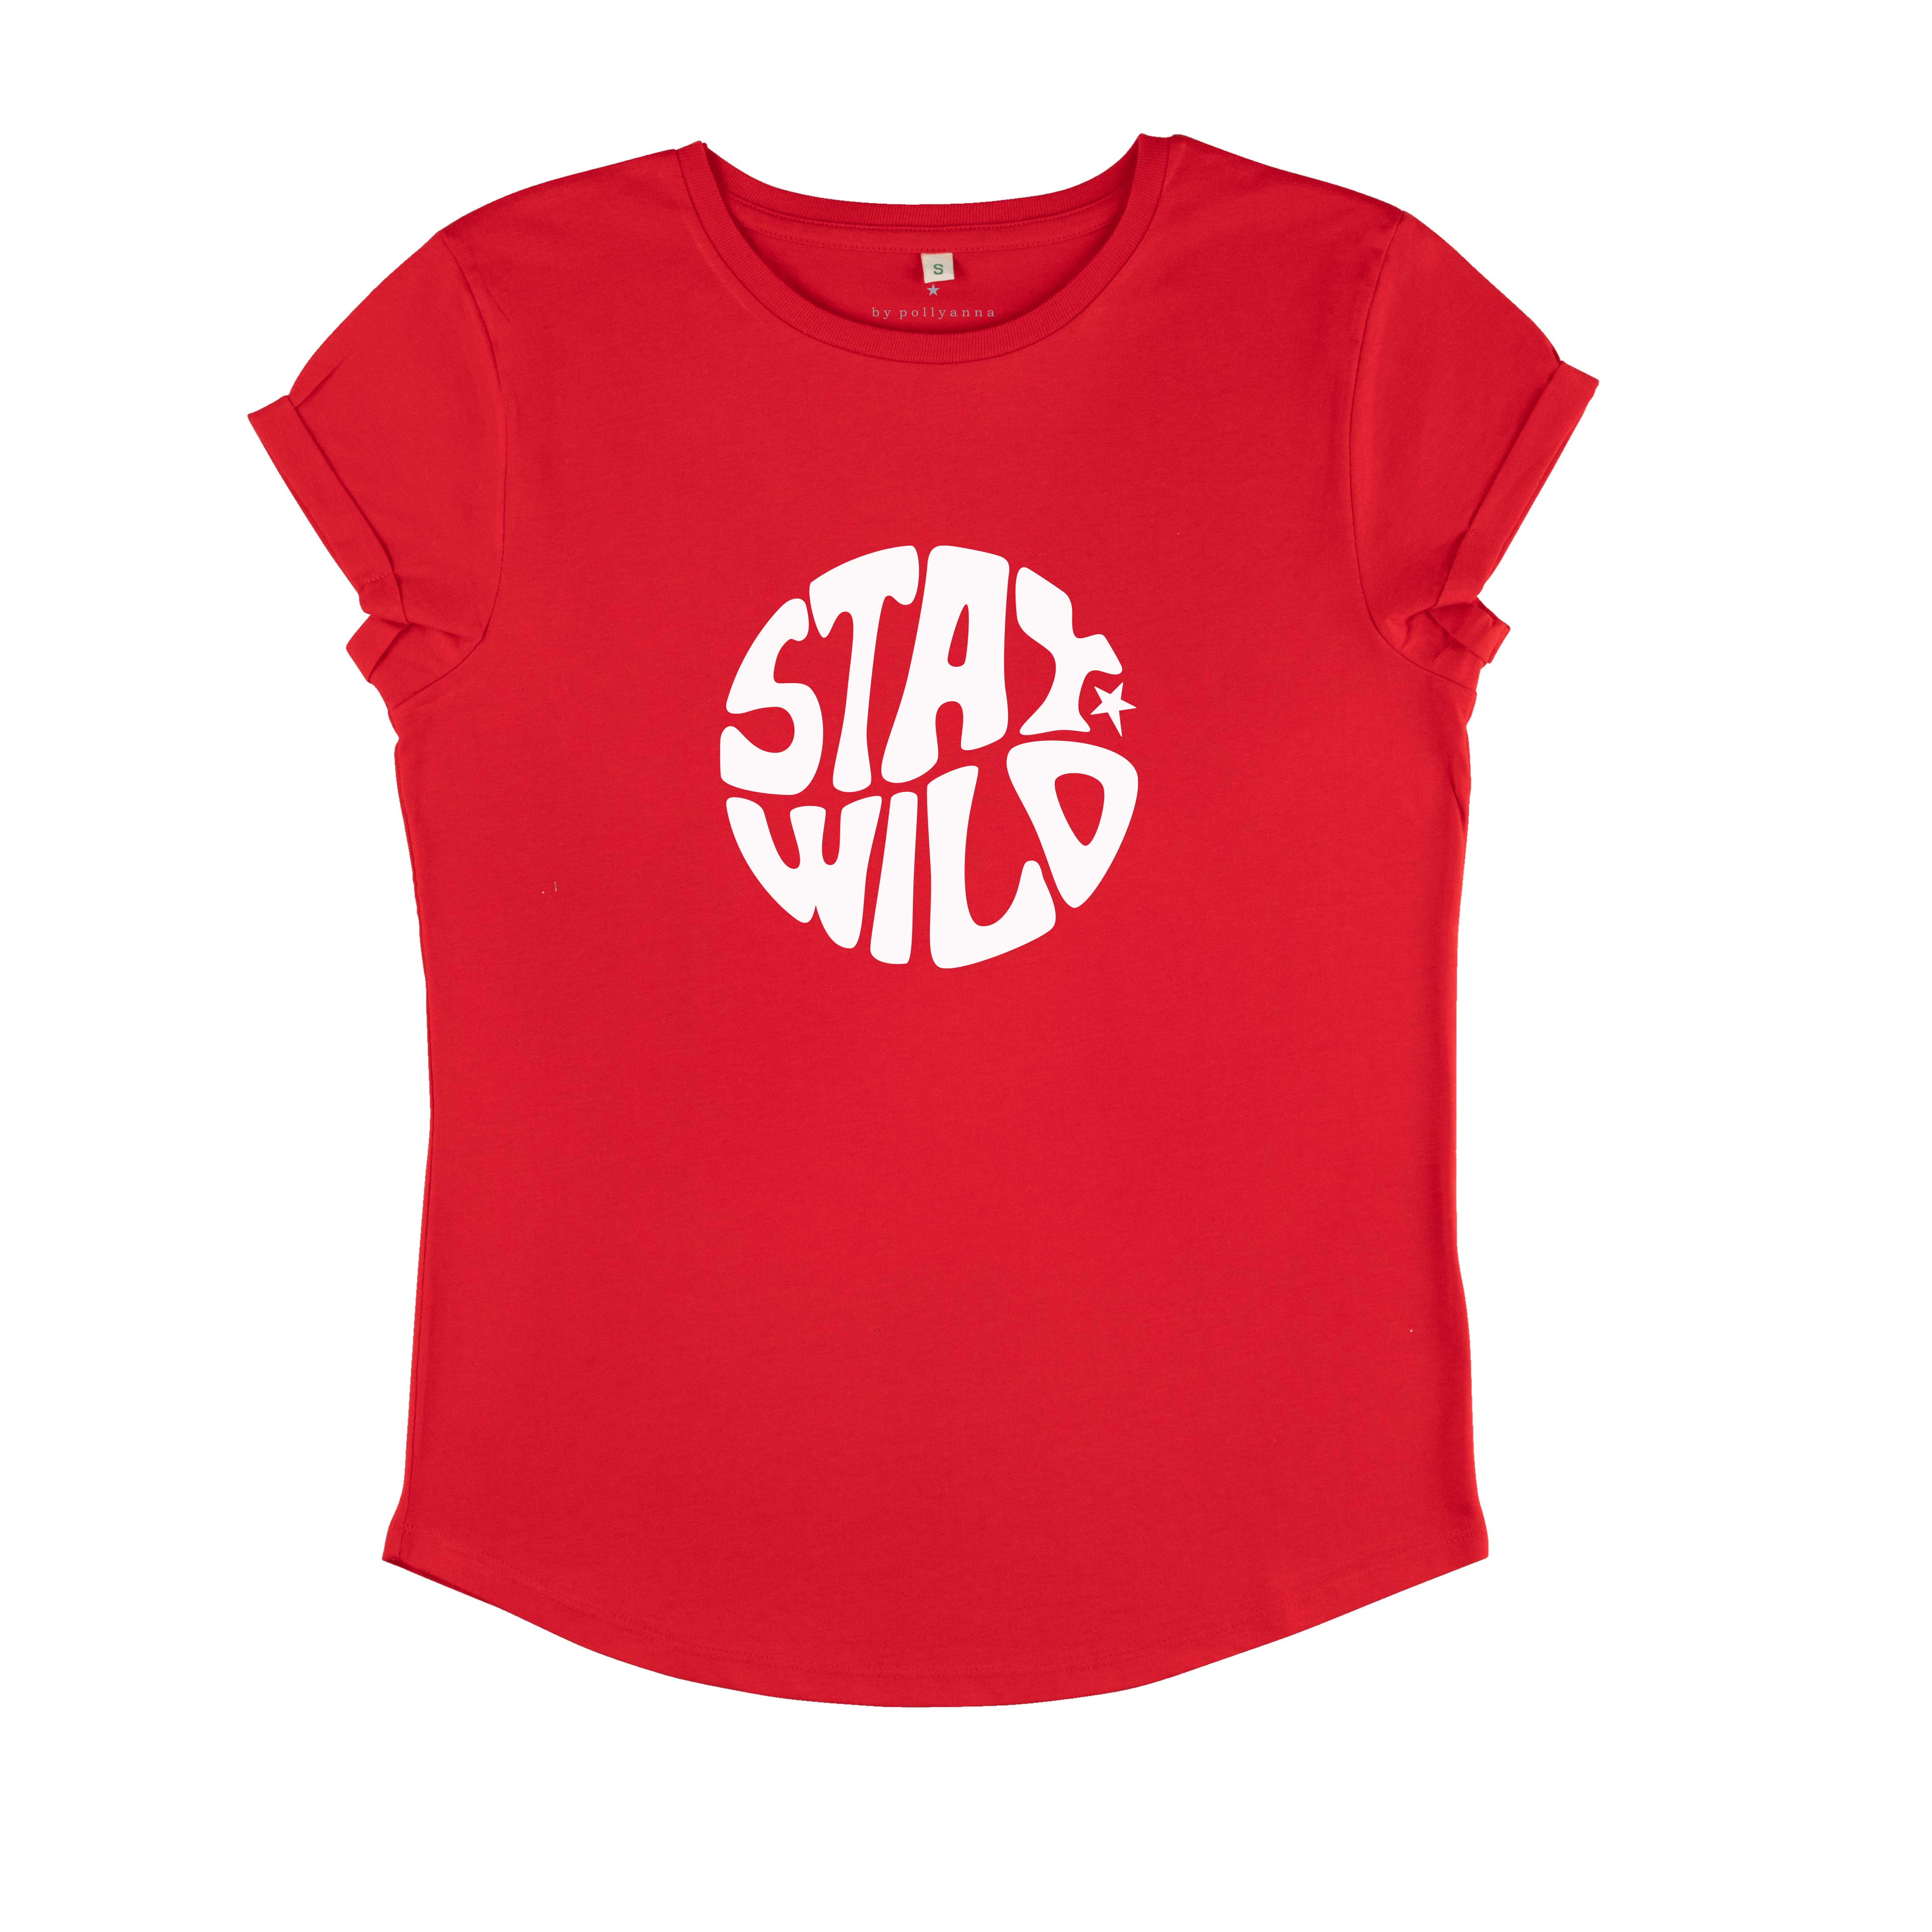 NEW Red Stay Wild Tee - REGULAR FIT